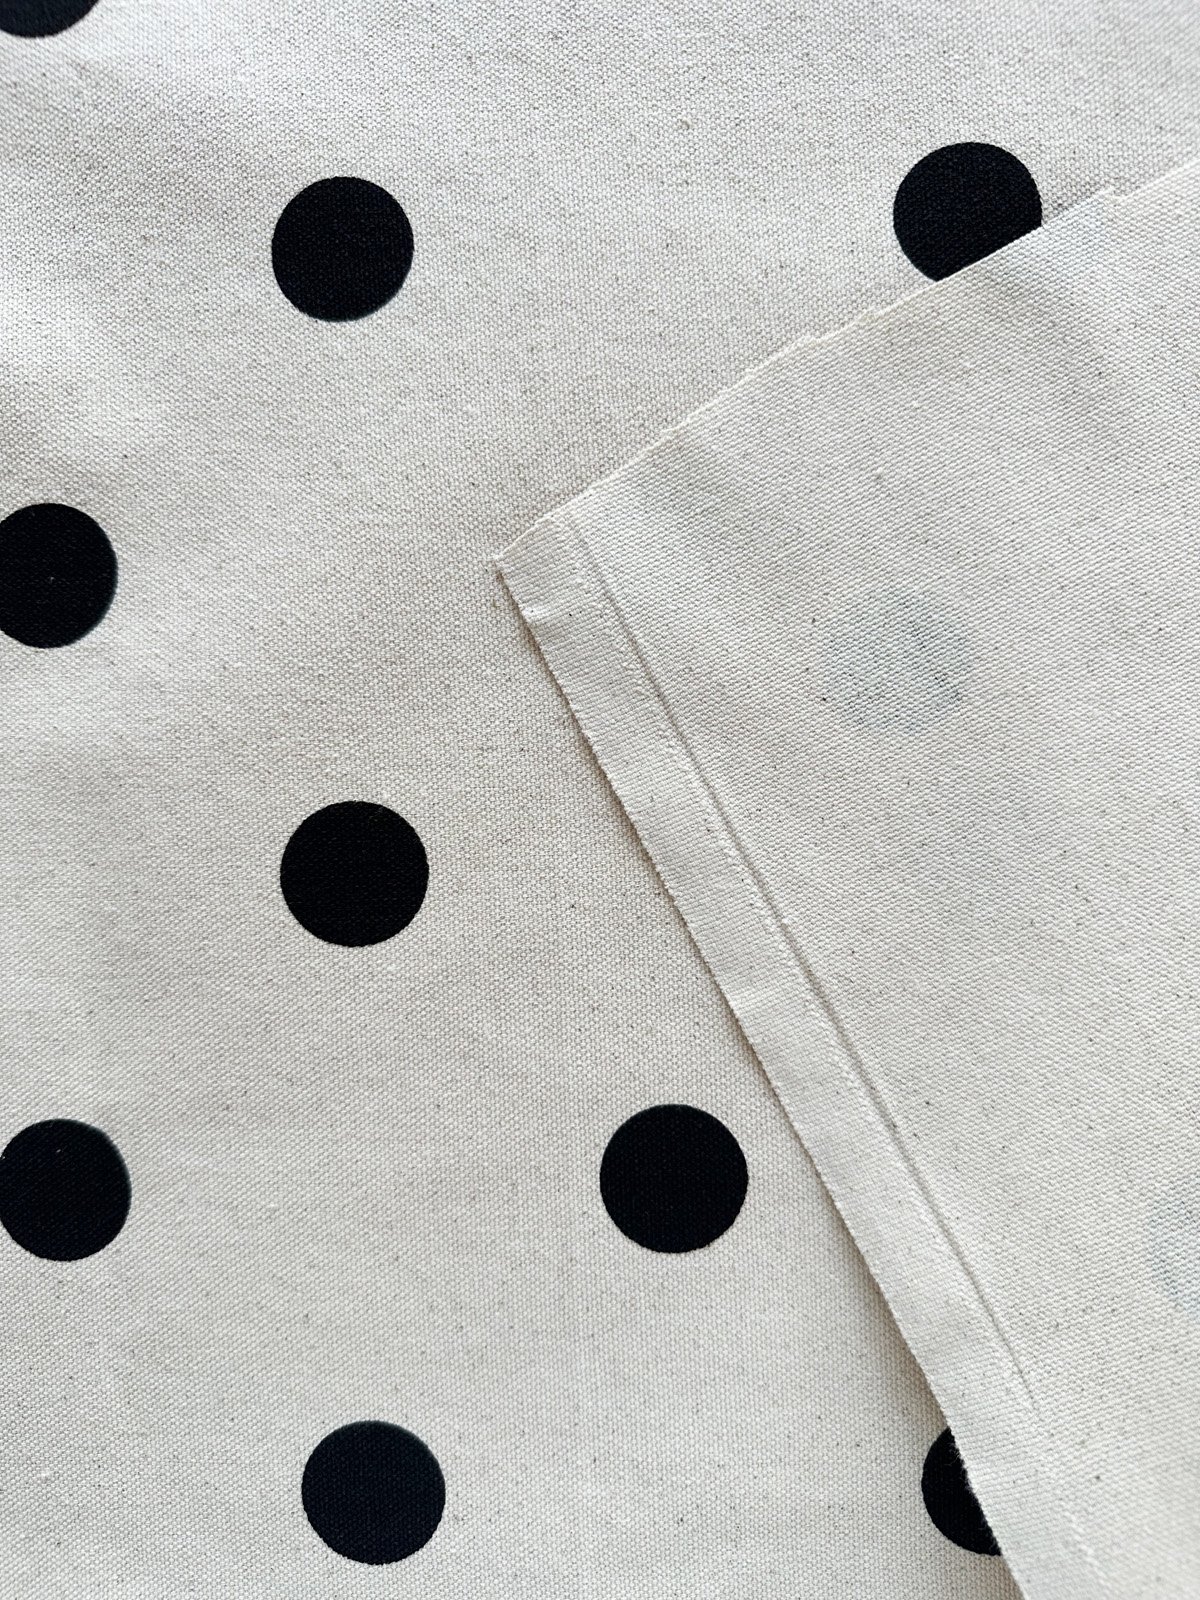 Outerwear/Accessory Fabric Materials — L'Etoffe Fabrics Online